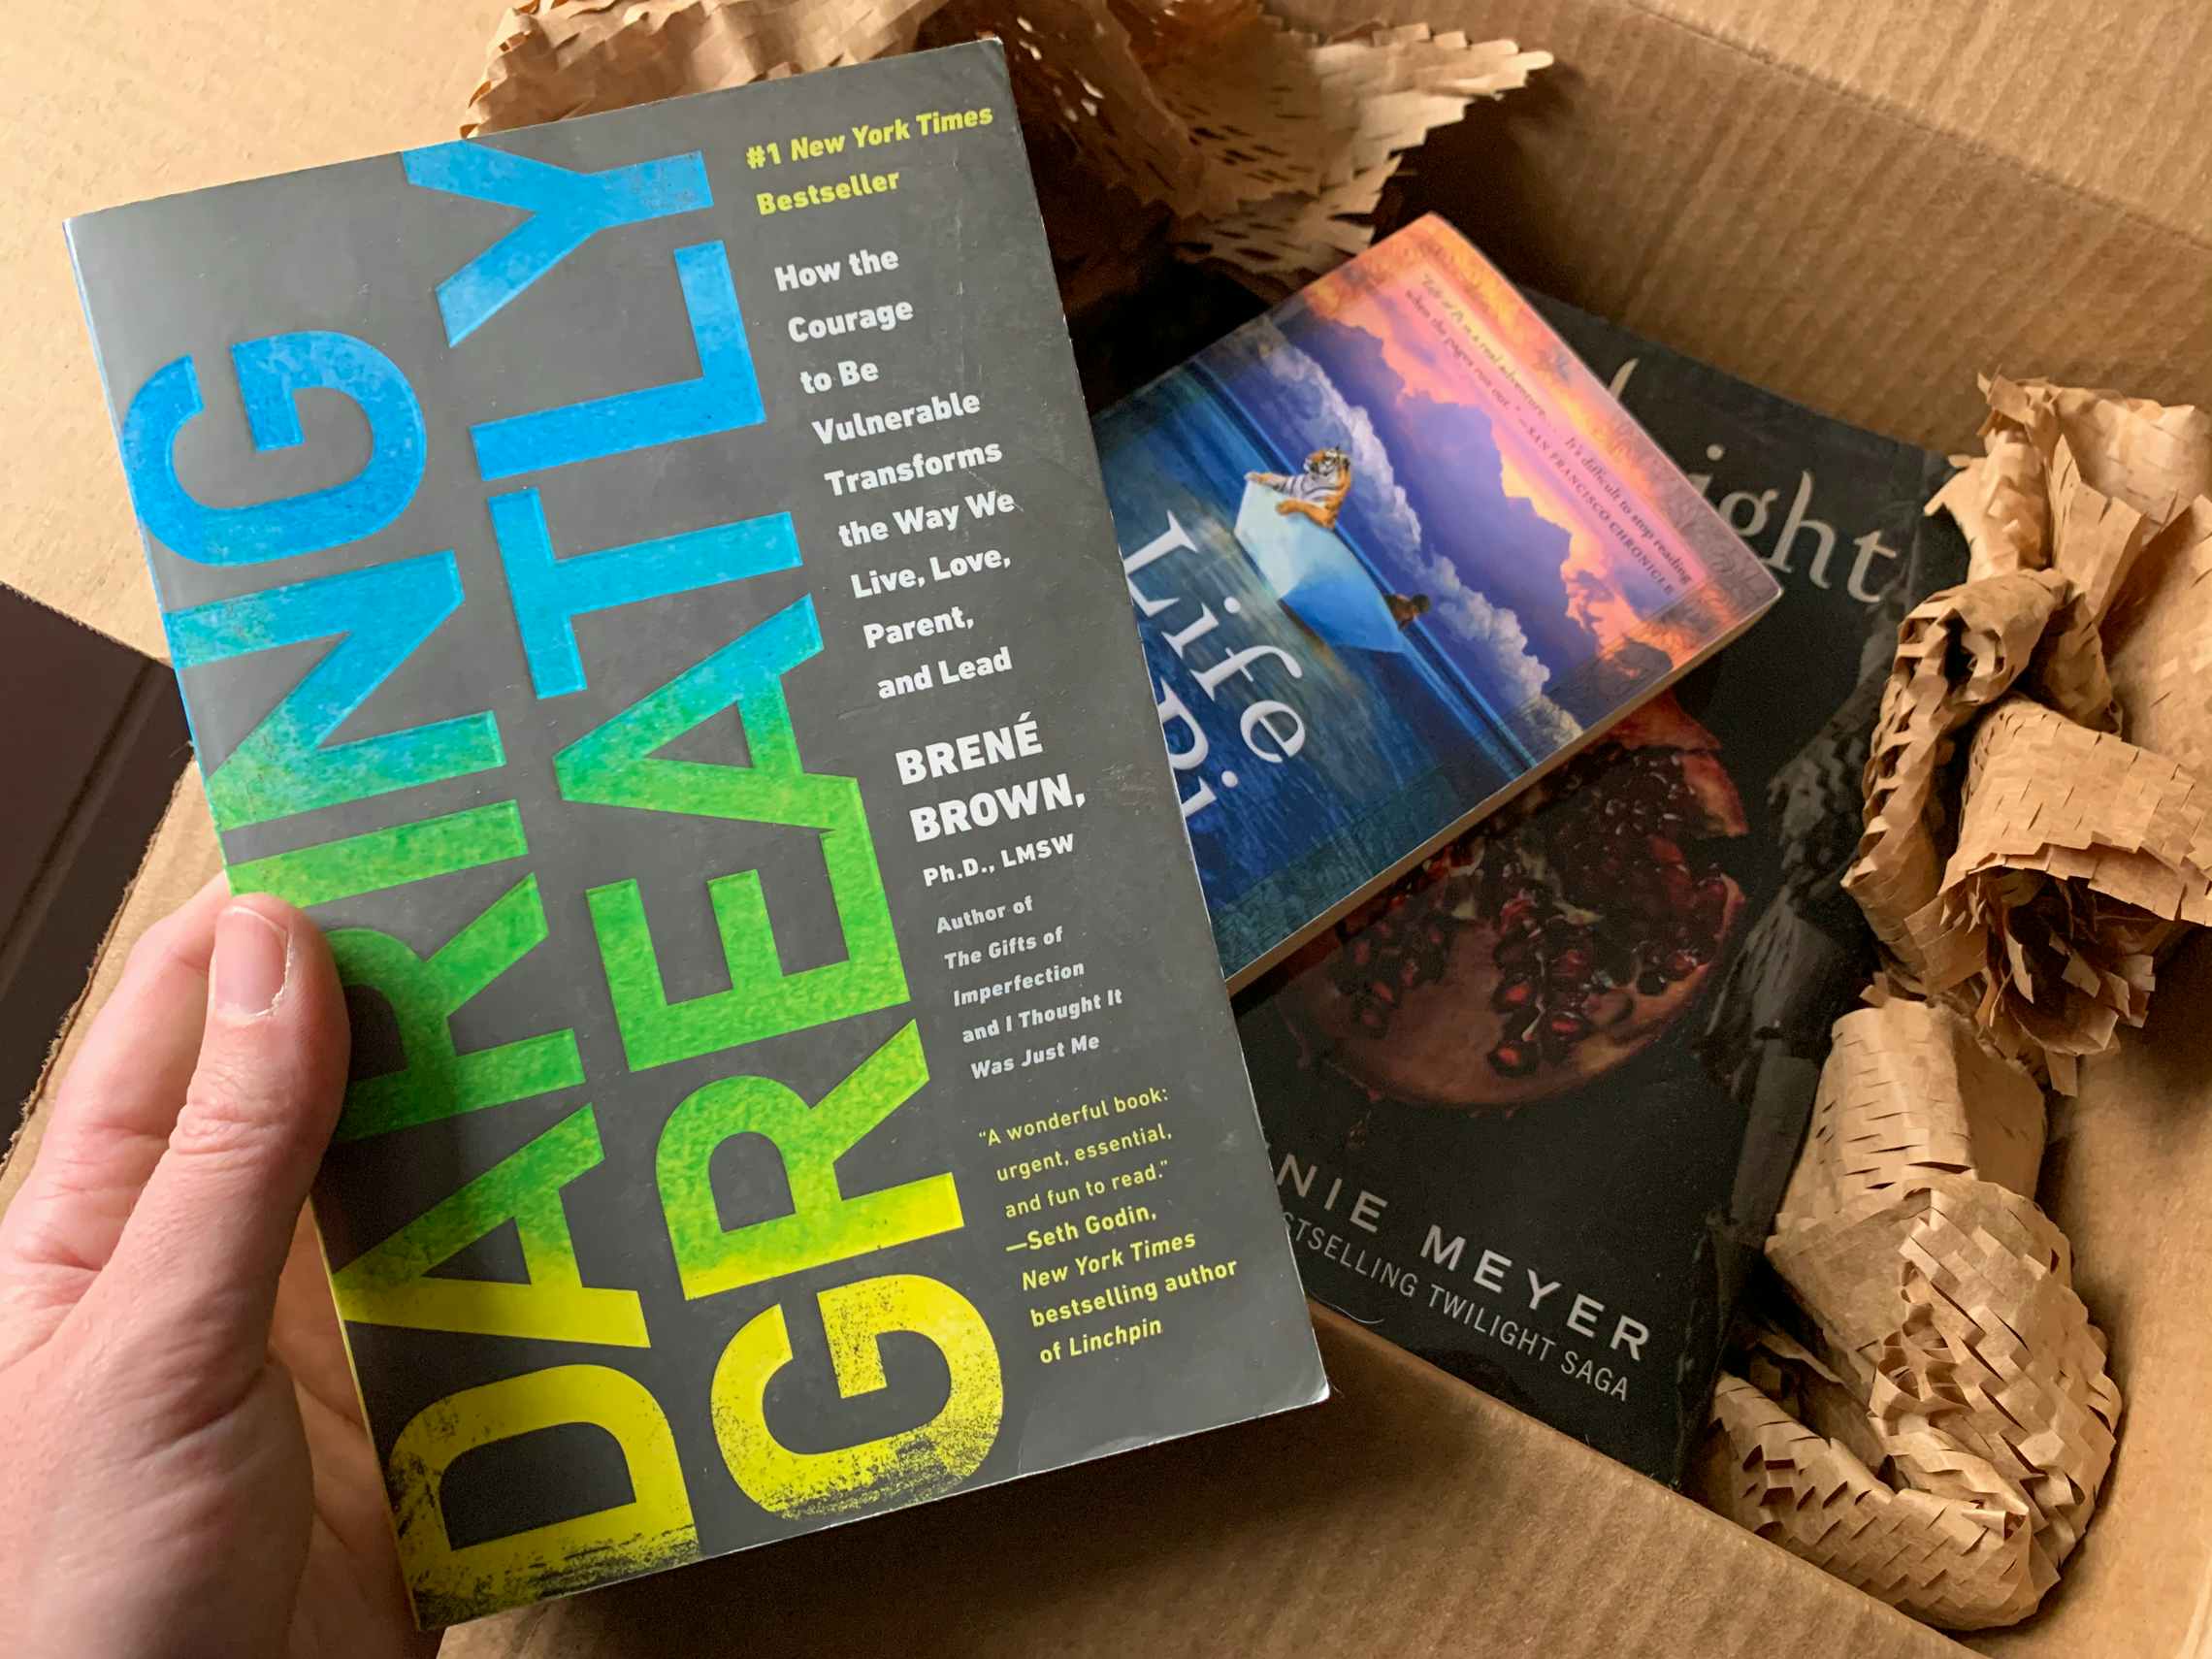 Books being pulled from a shipping box.